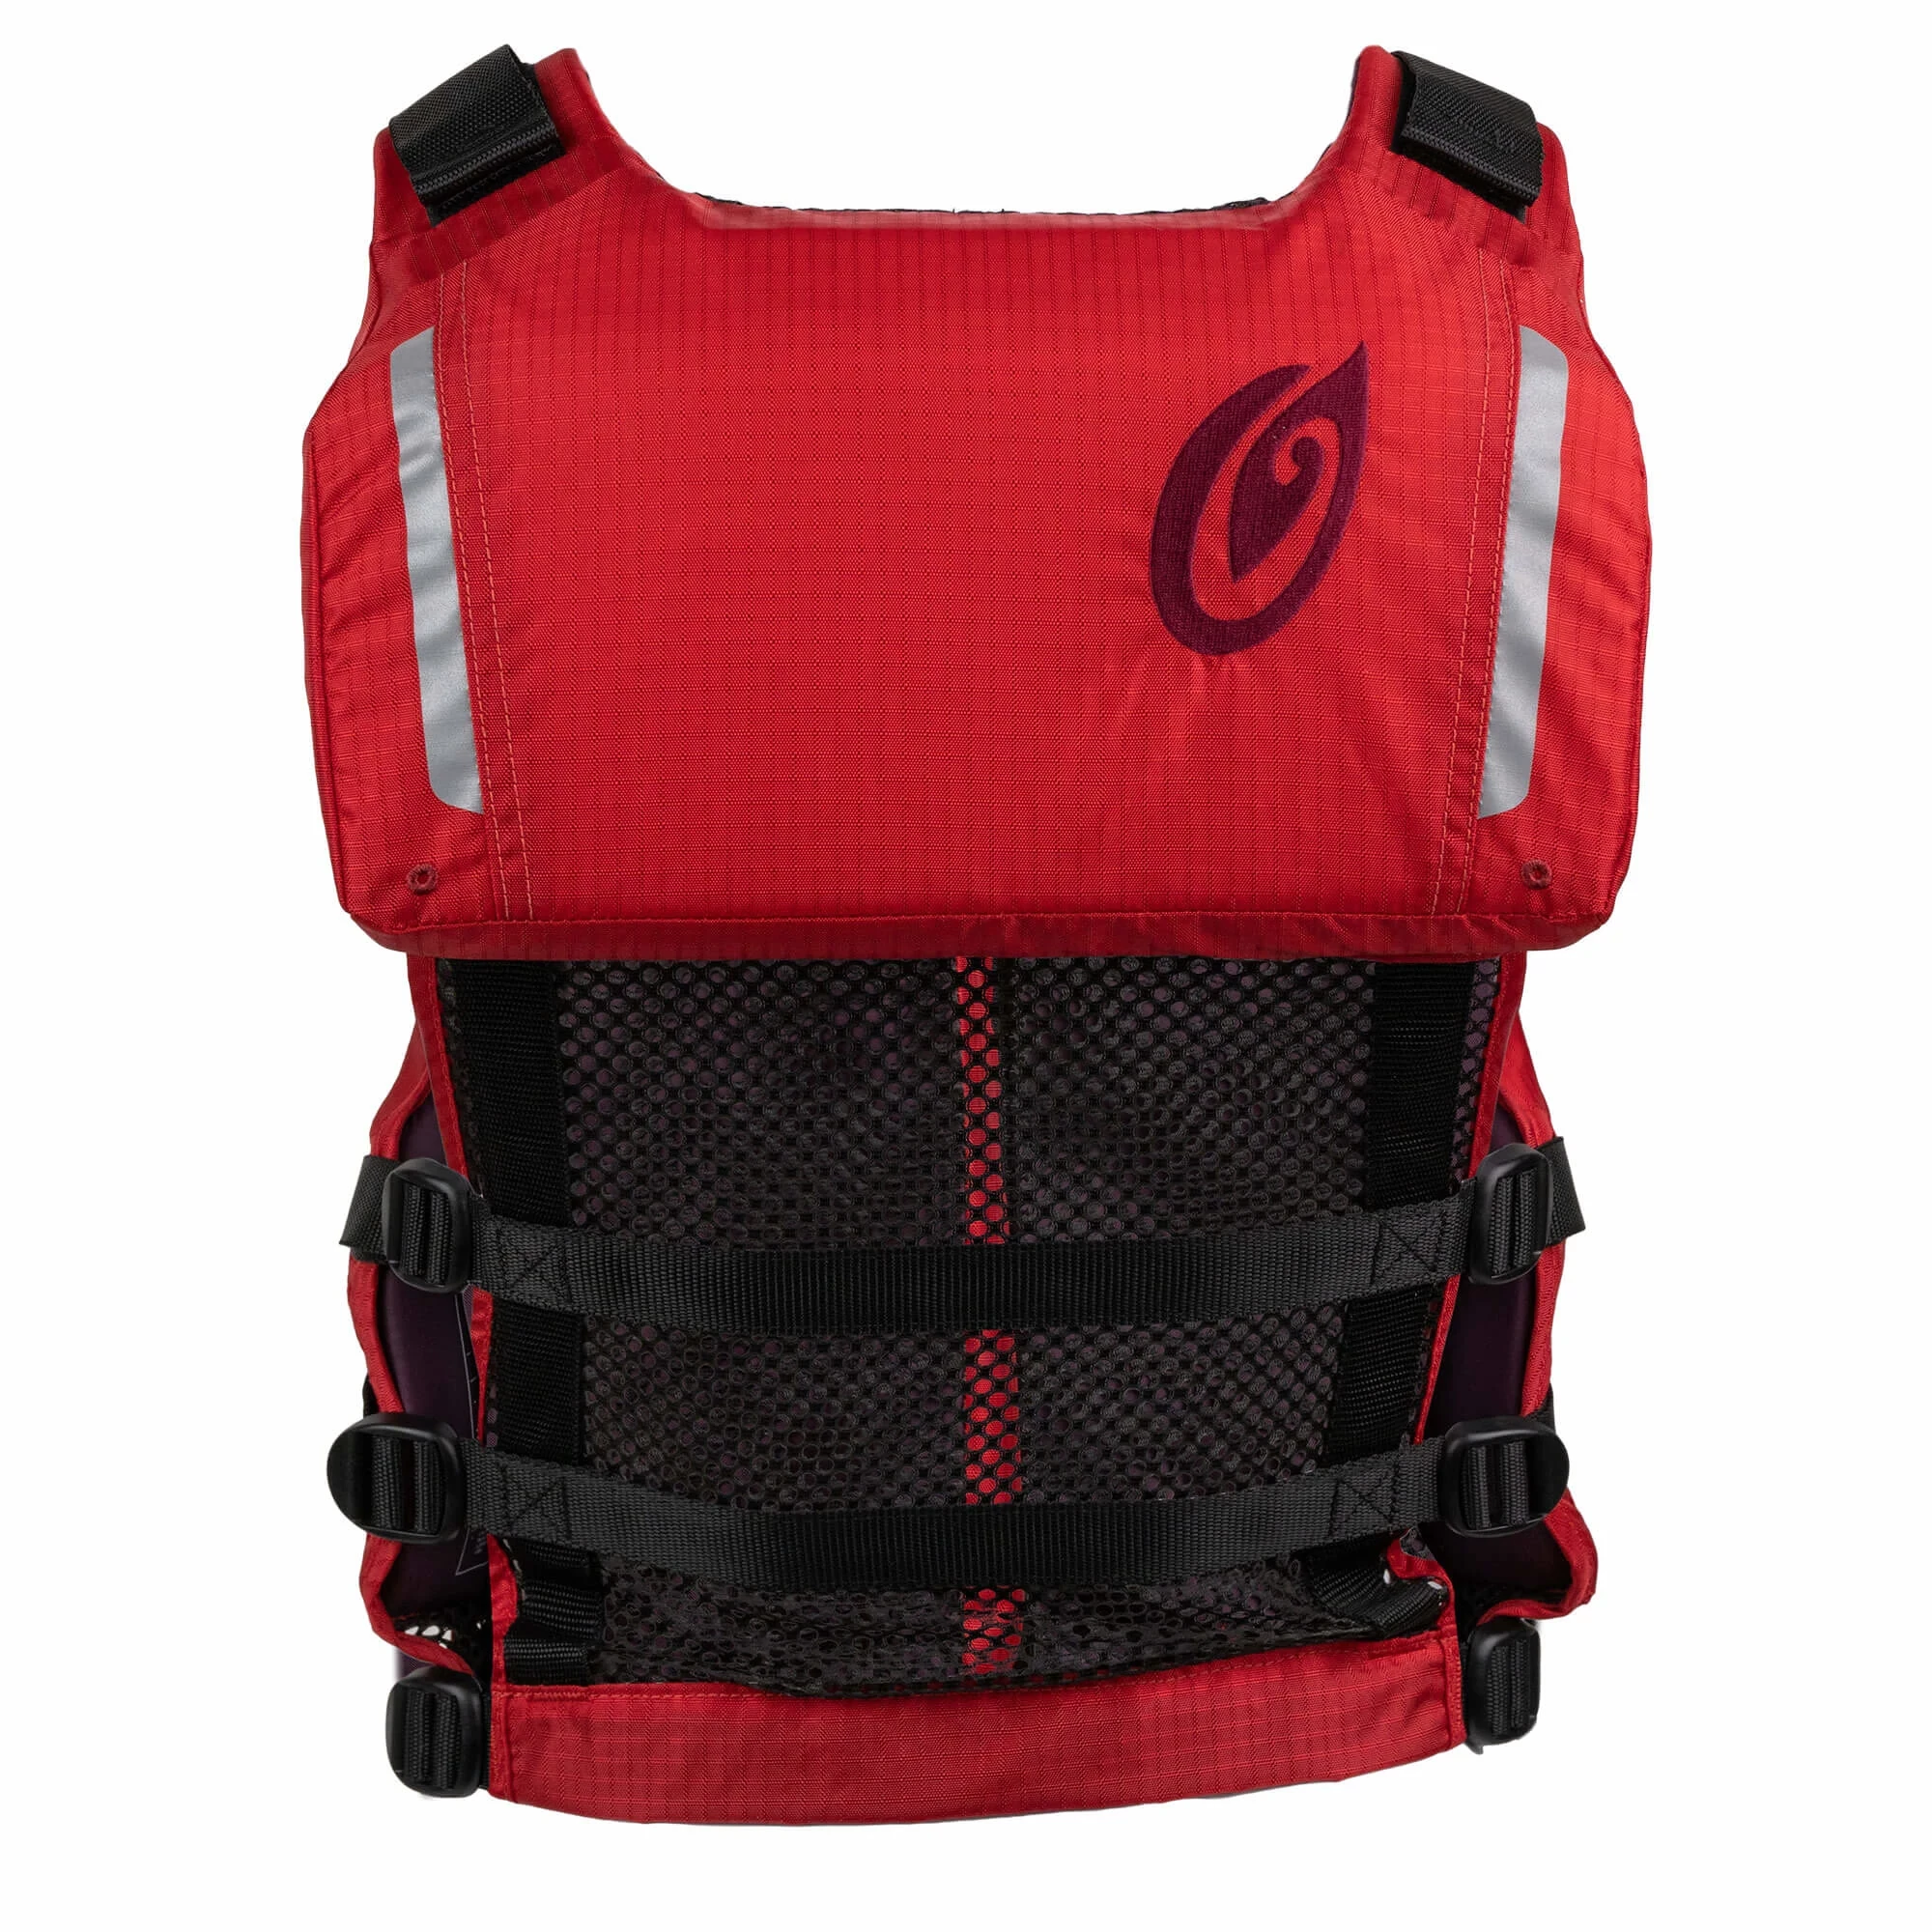 Back view of red Solitude II PFD